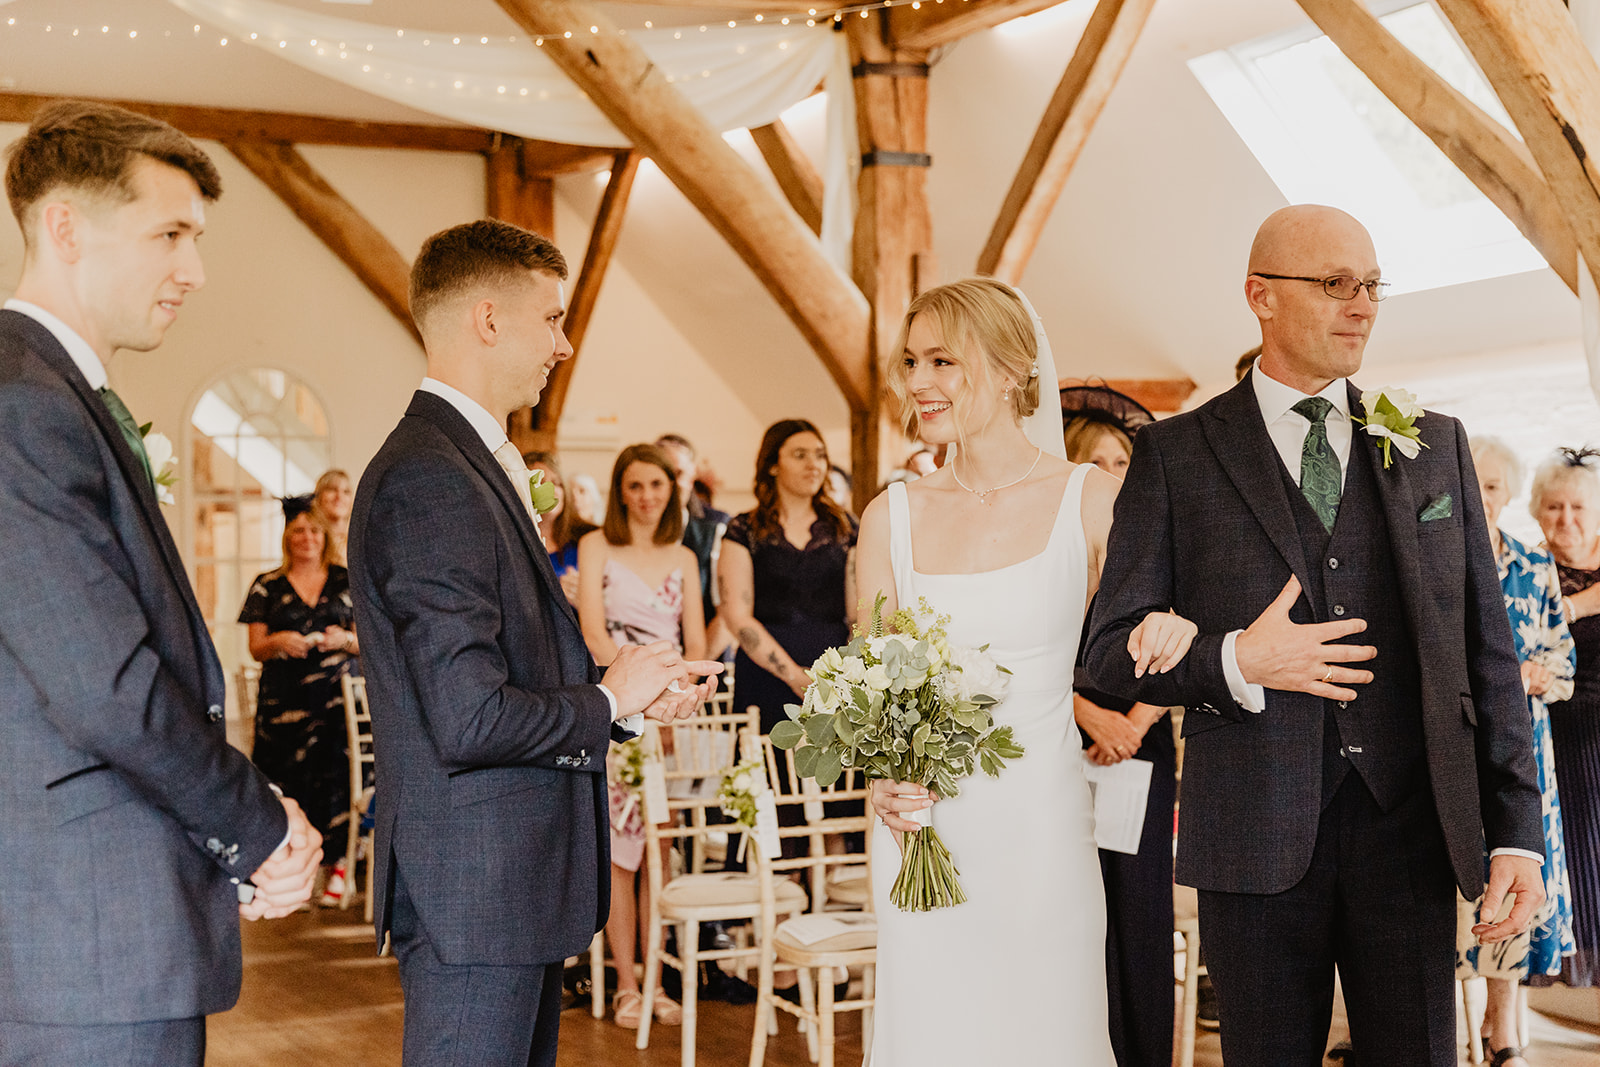 Bride and groom meet at a Bury Manor Barn Wedding in Sussex. Photographer OliveJoy Photography.